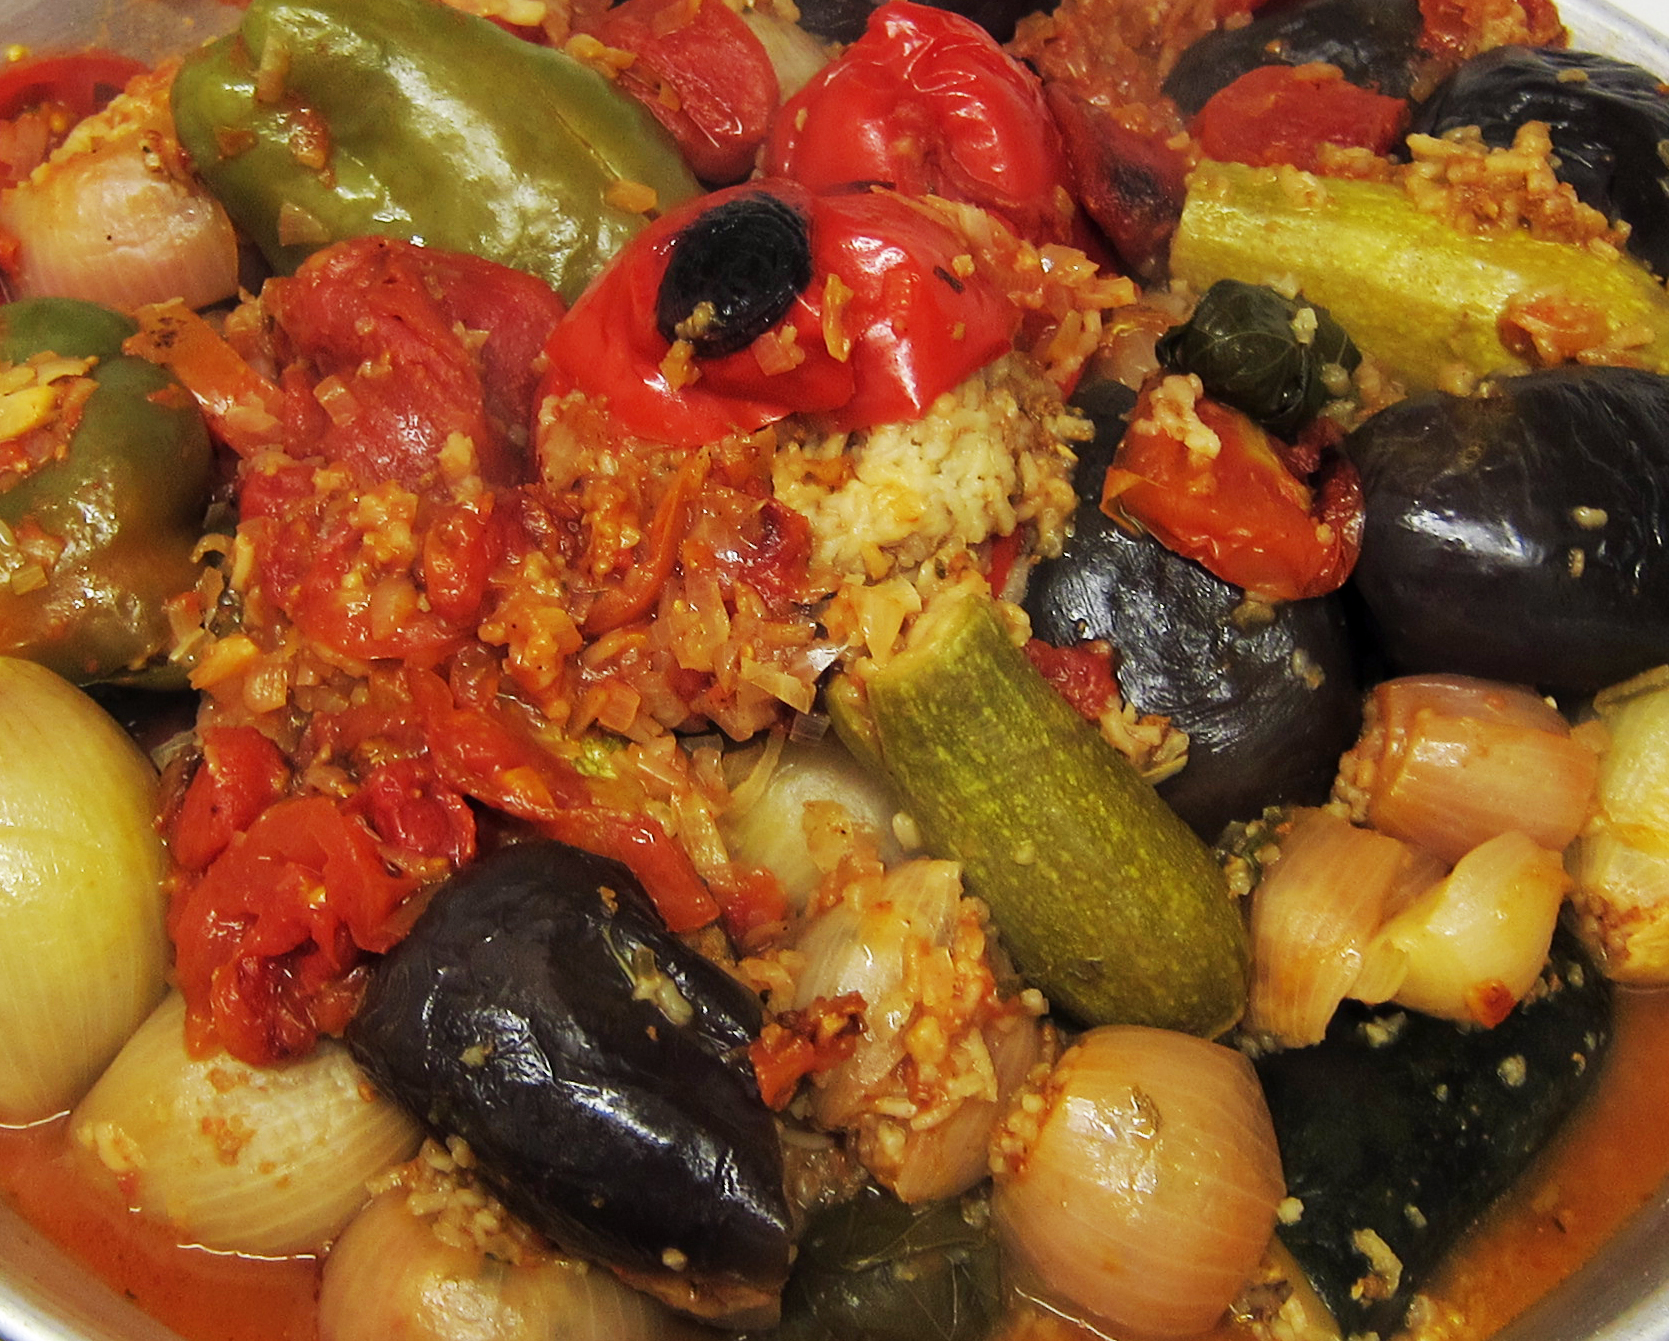    Mhasha , a dish consisting of stuffed grape leaves, aubergines, courgettes, peppers, onions and tomatoes. Cooked and served on the final night, May 7, 2013.    